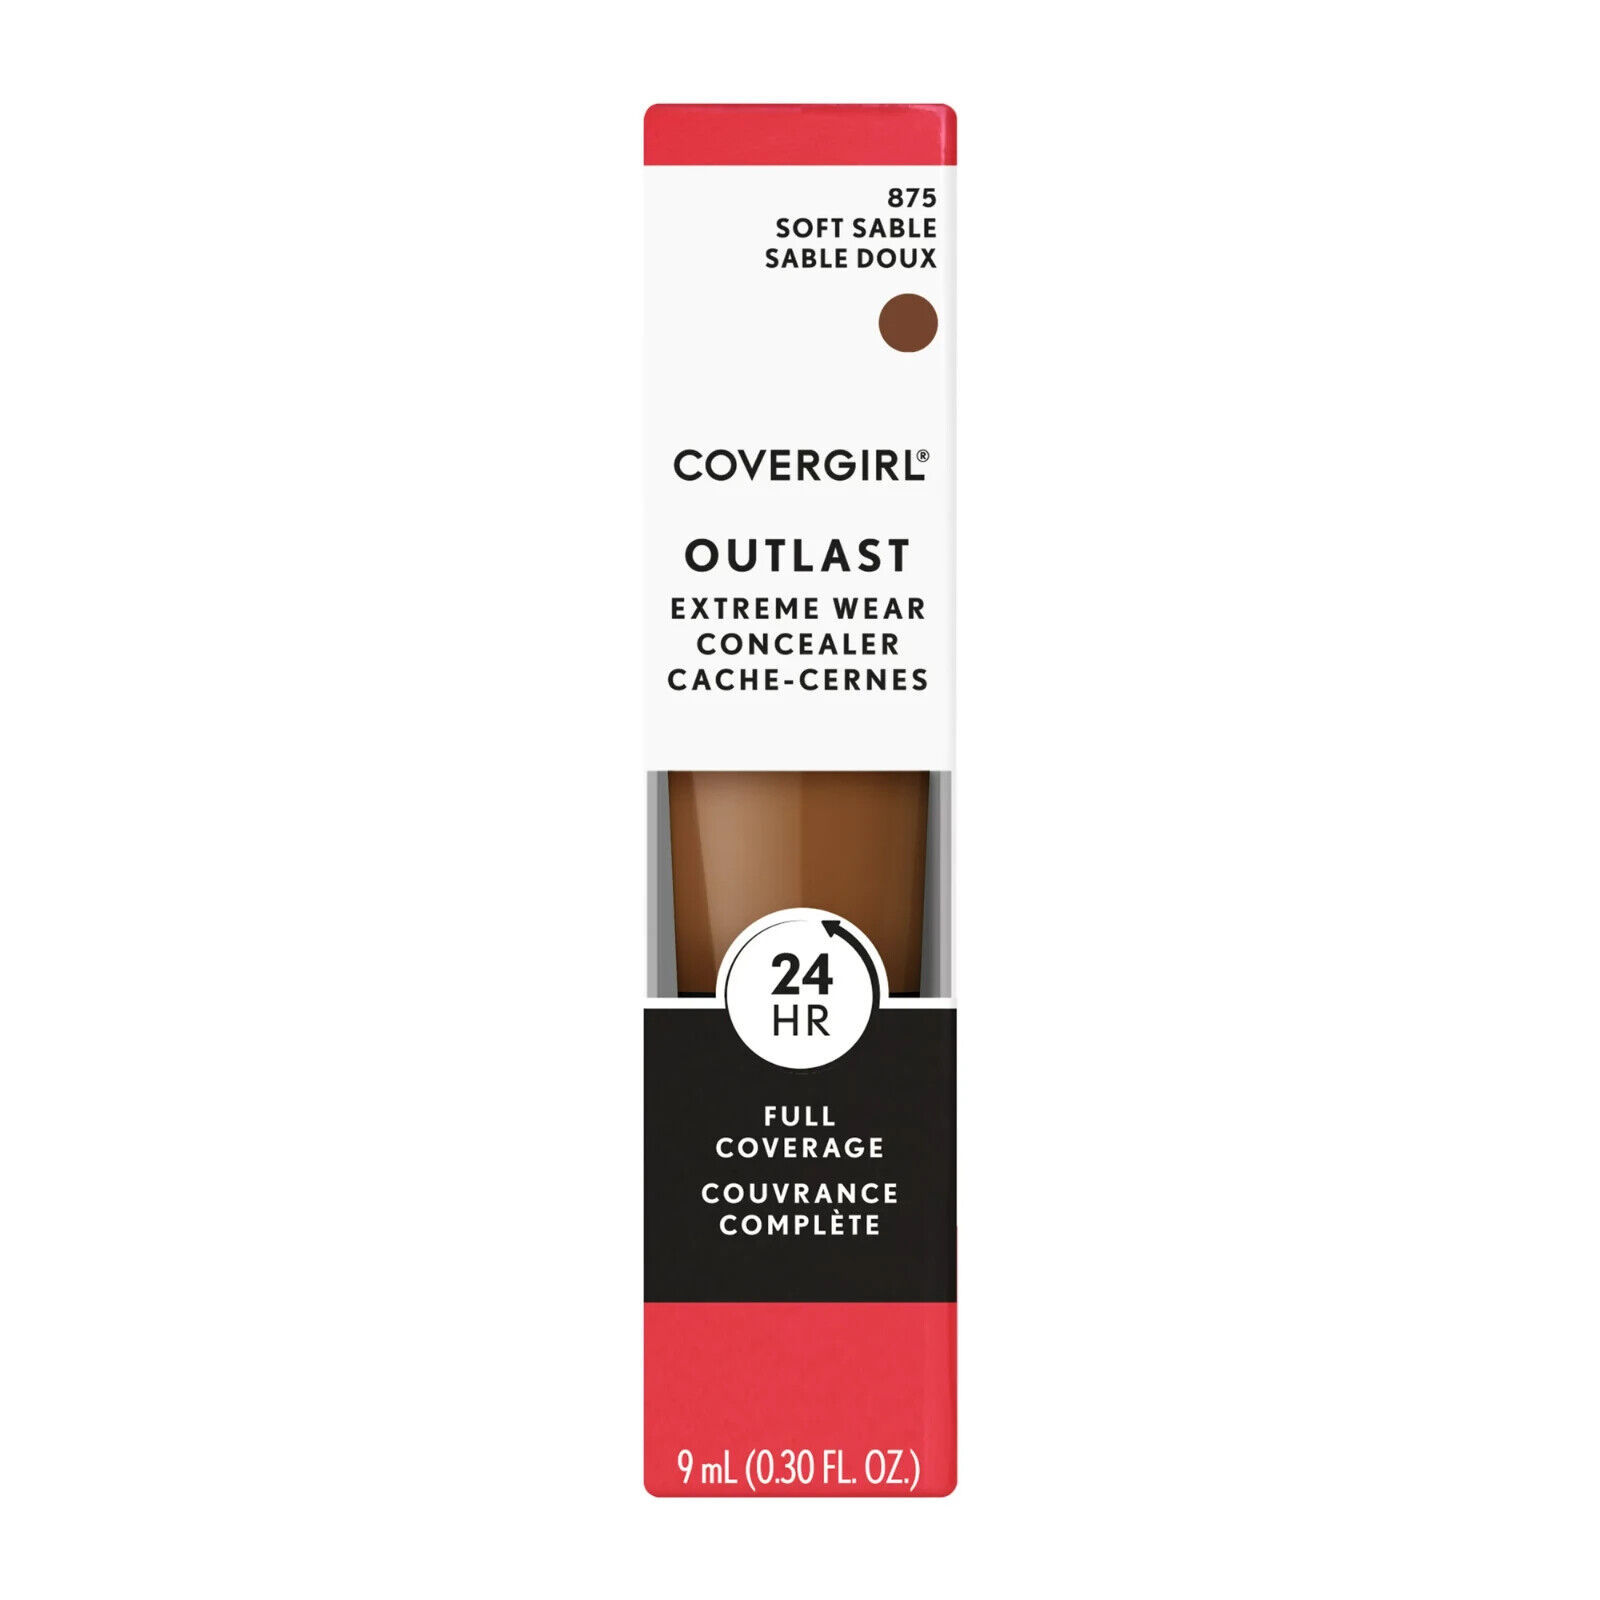 Primary image for COVERGIRL Outlast Extreme Wear Concealer, 875 Soft Sable